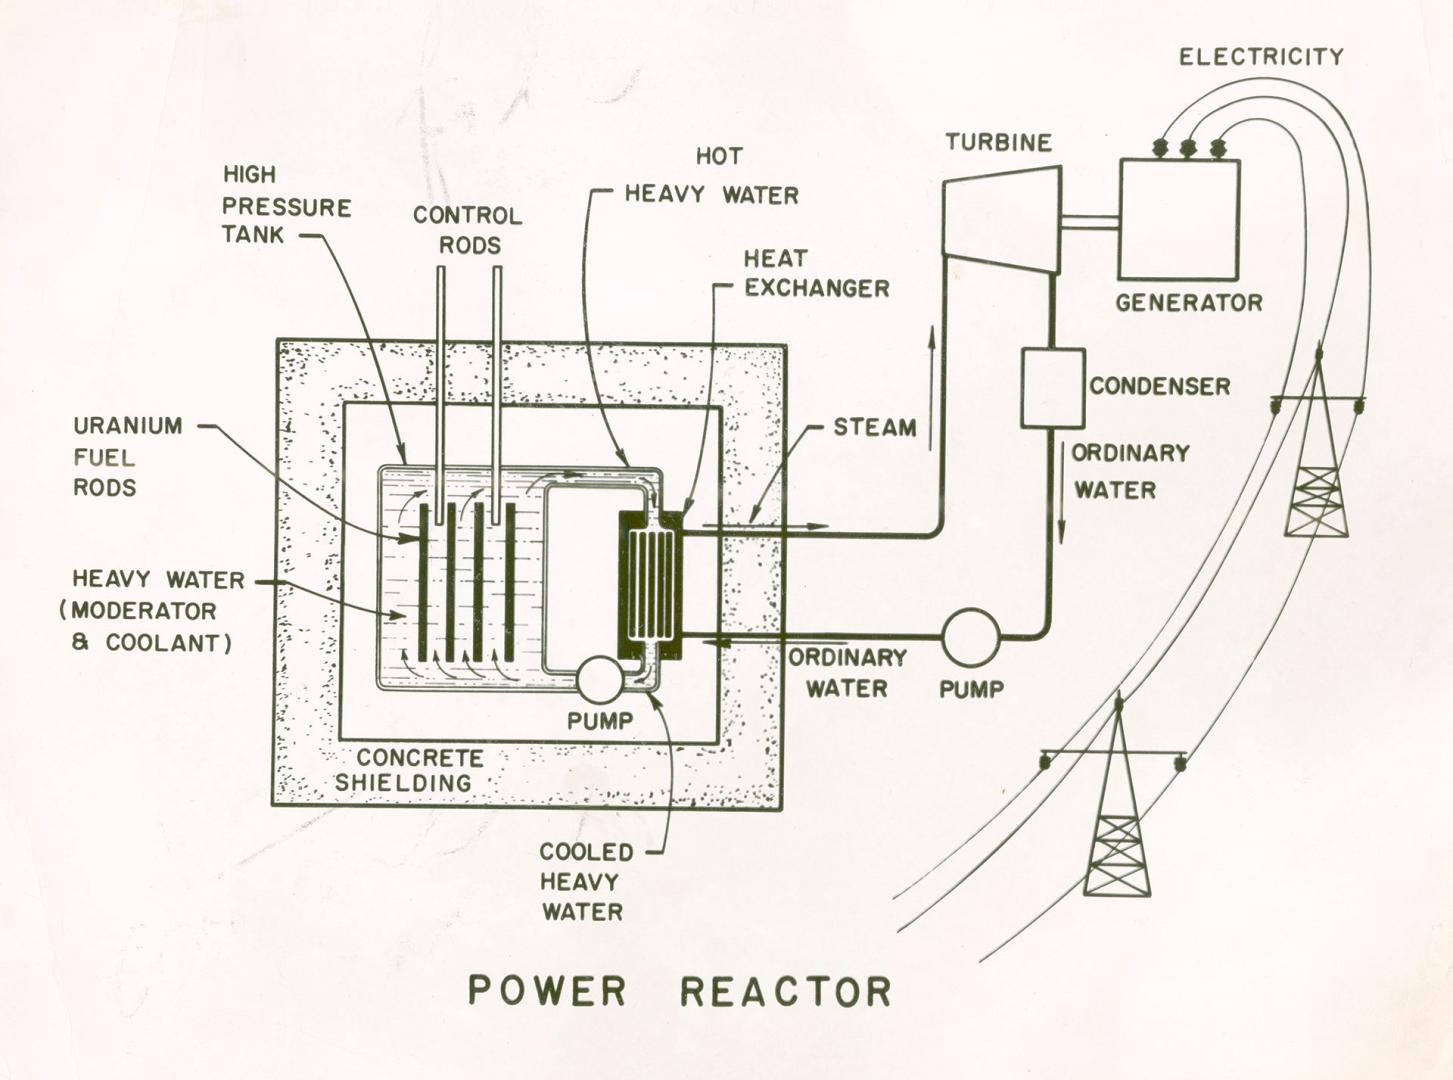 Schematic diagram of a heavy water-natural uranium power reactor system